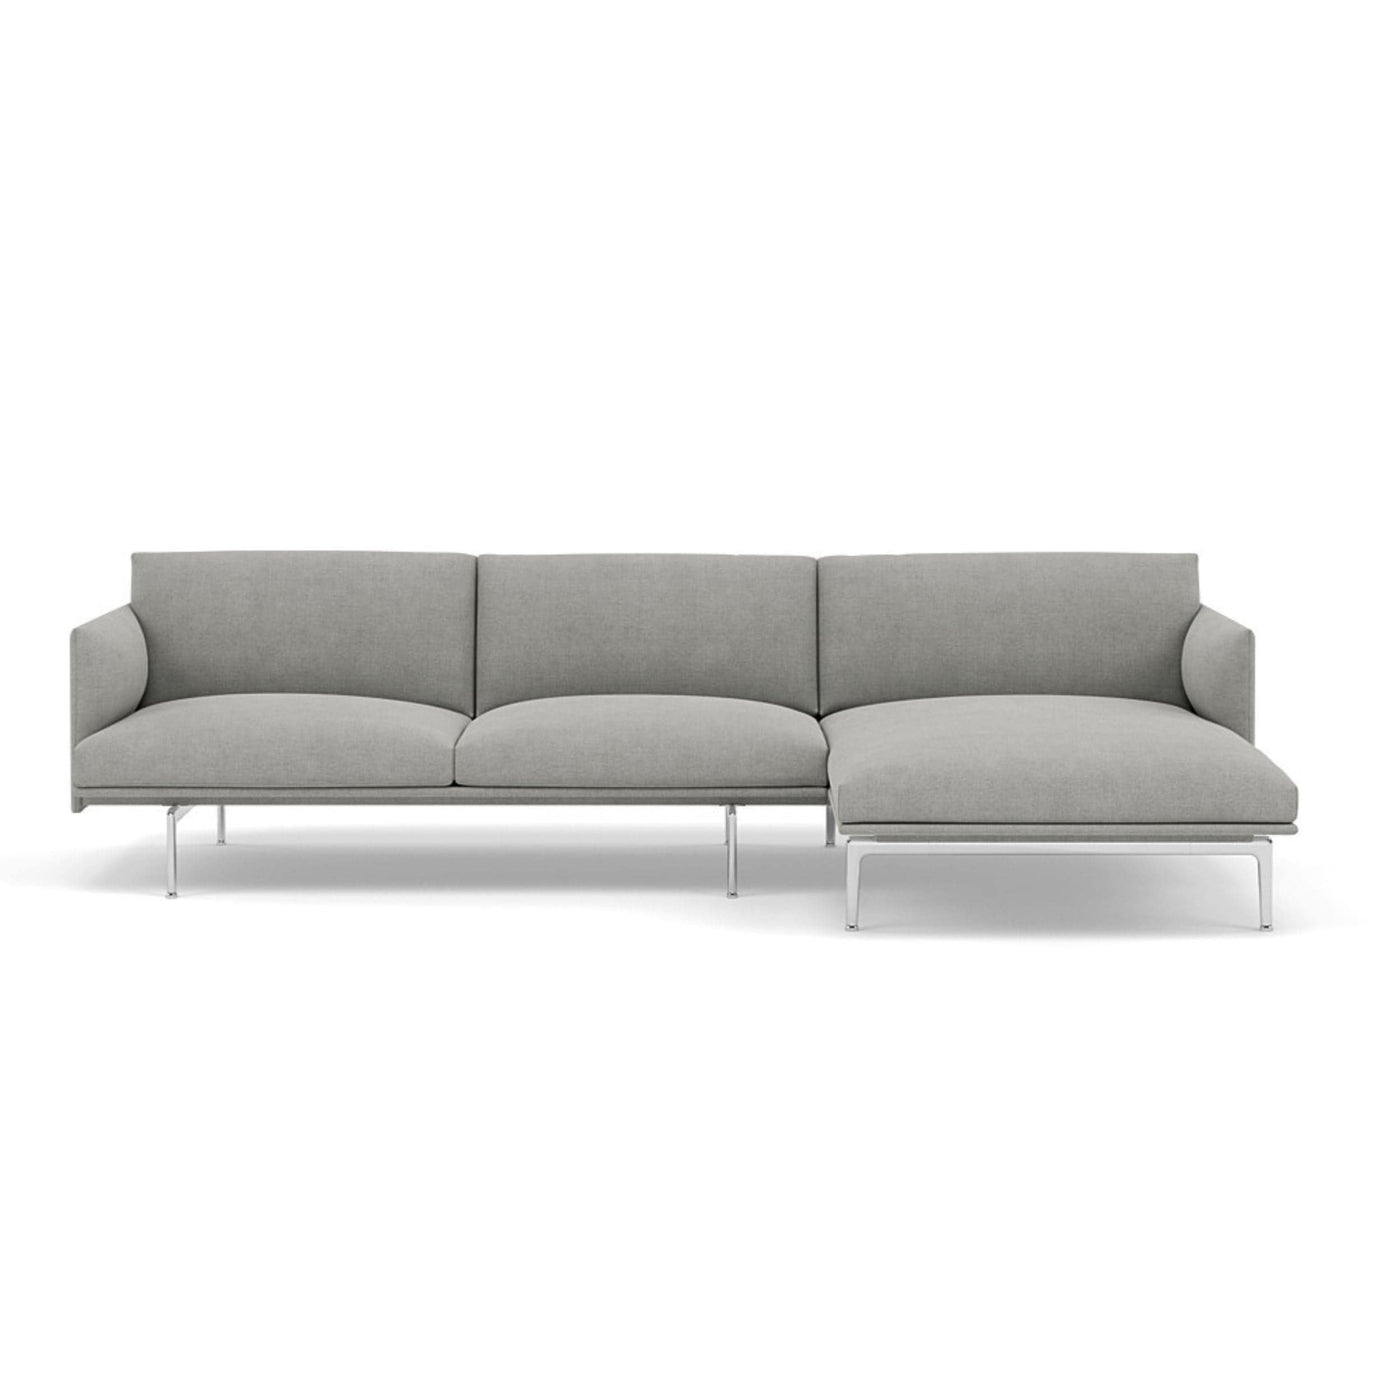 Muuto Outline Chaise Longue sofa in fiord 151. Made to order from someday designs. #colour_fiord-151